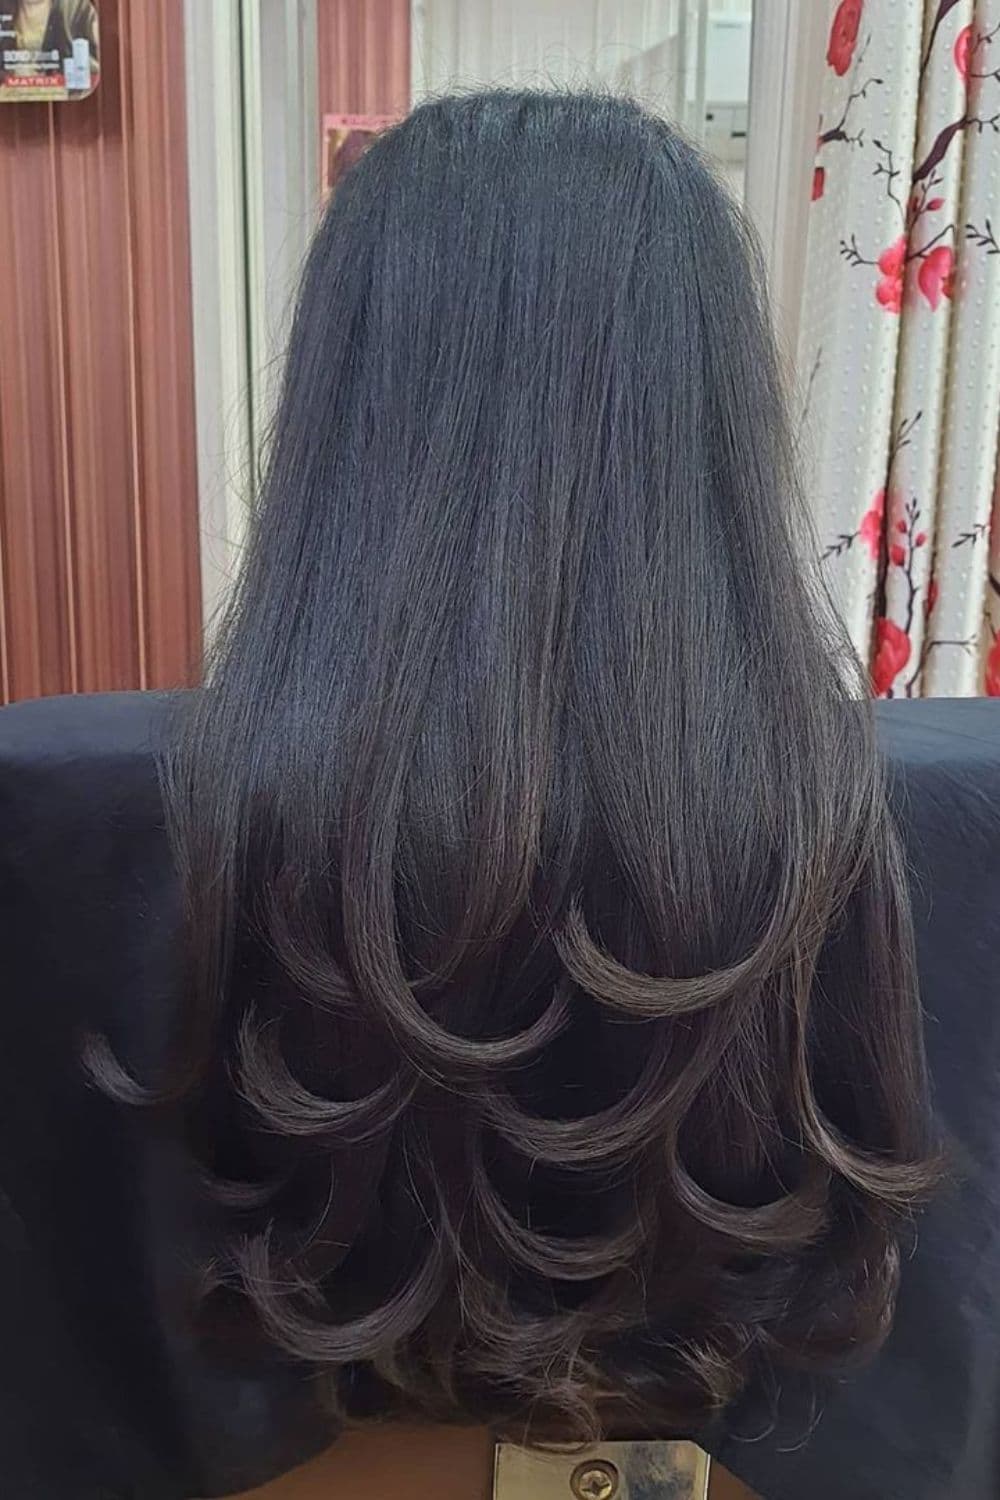 A woman's hair in black, long step layers.